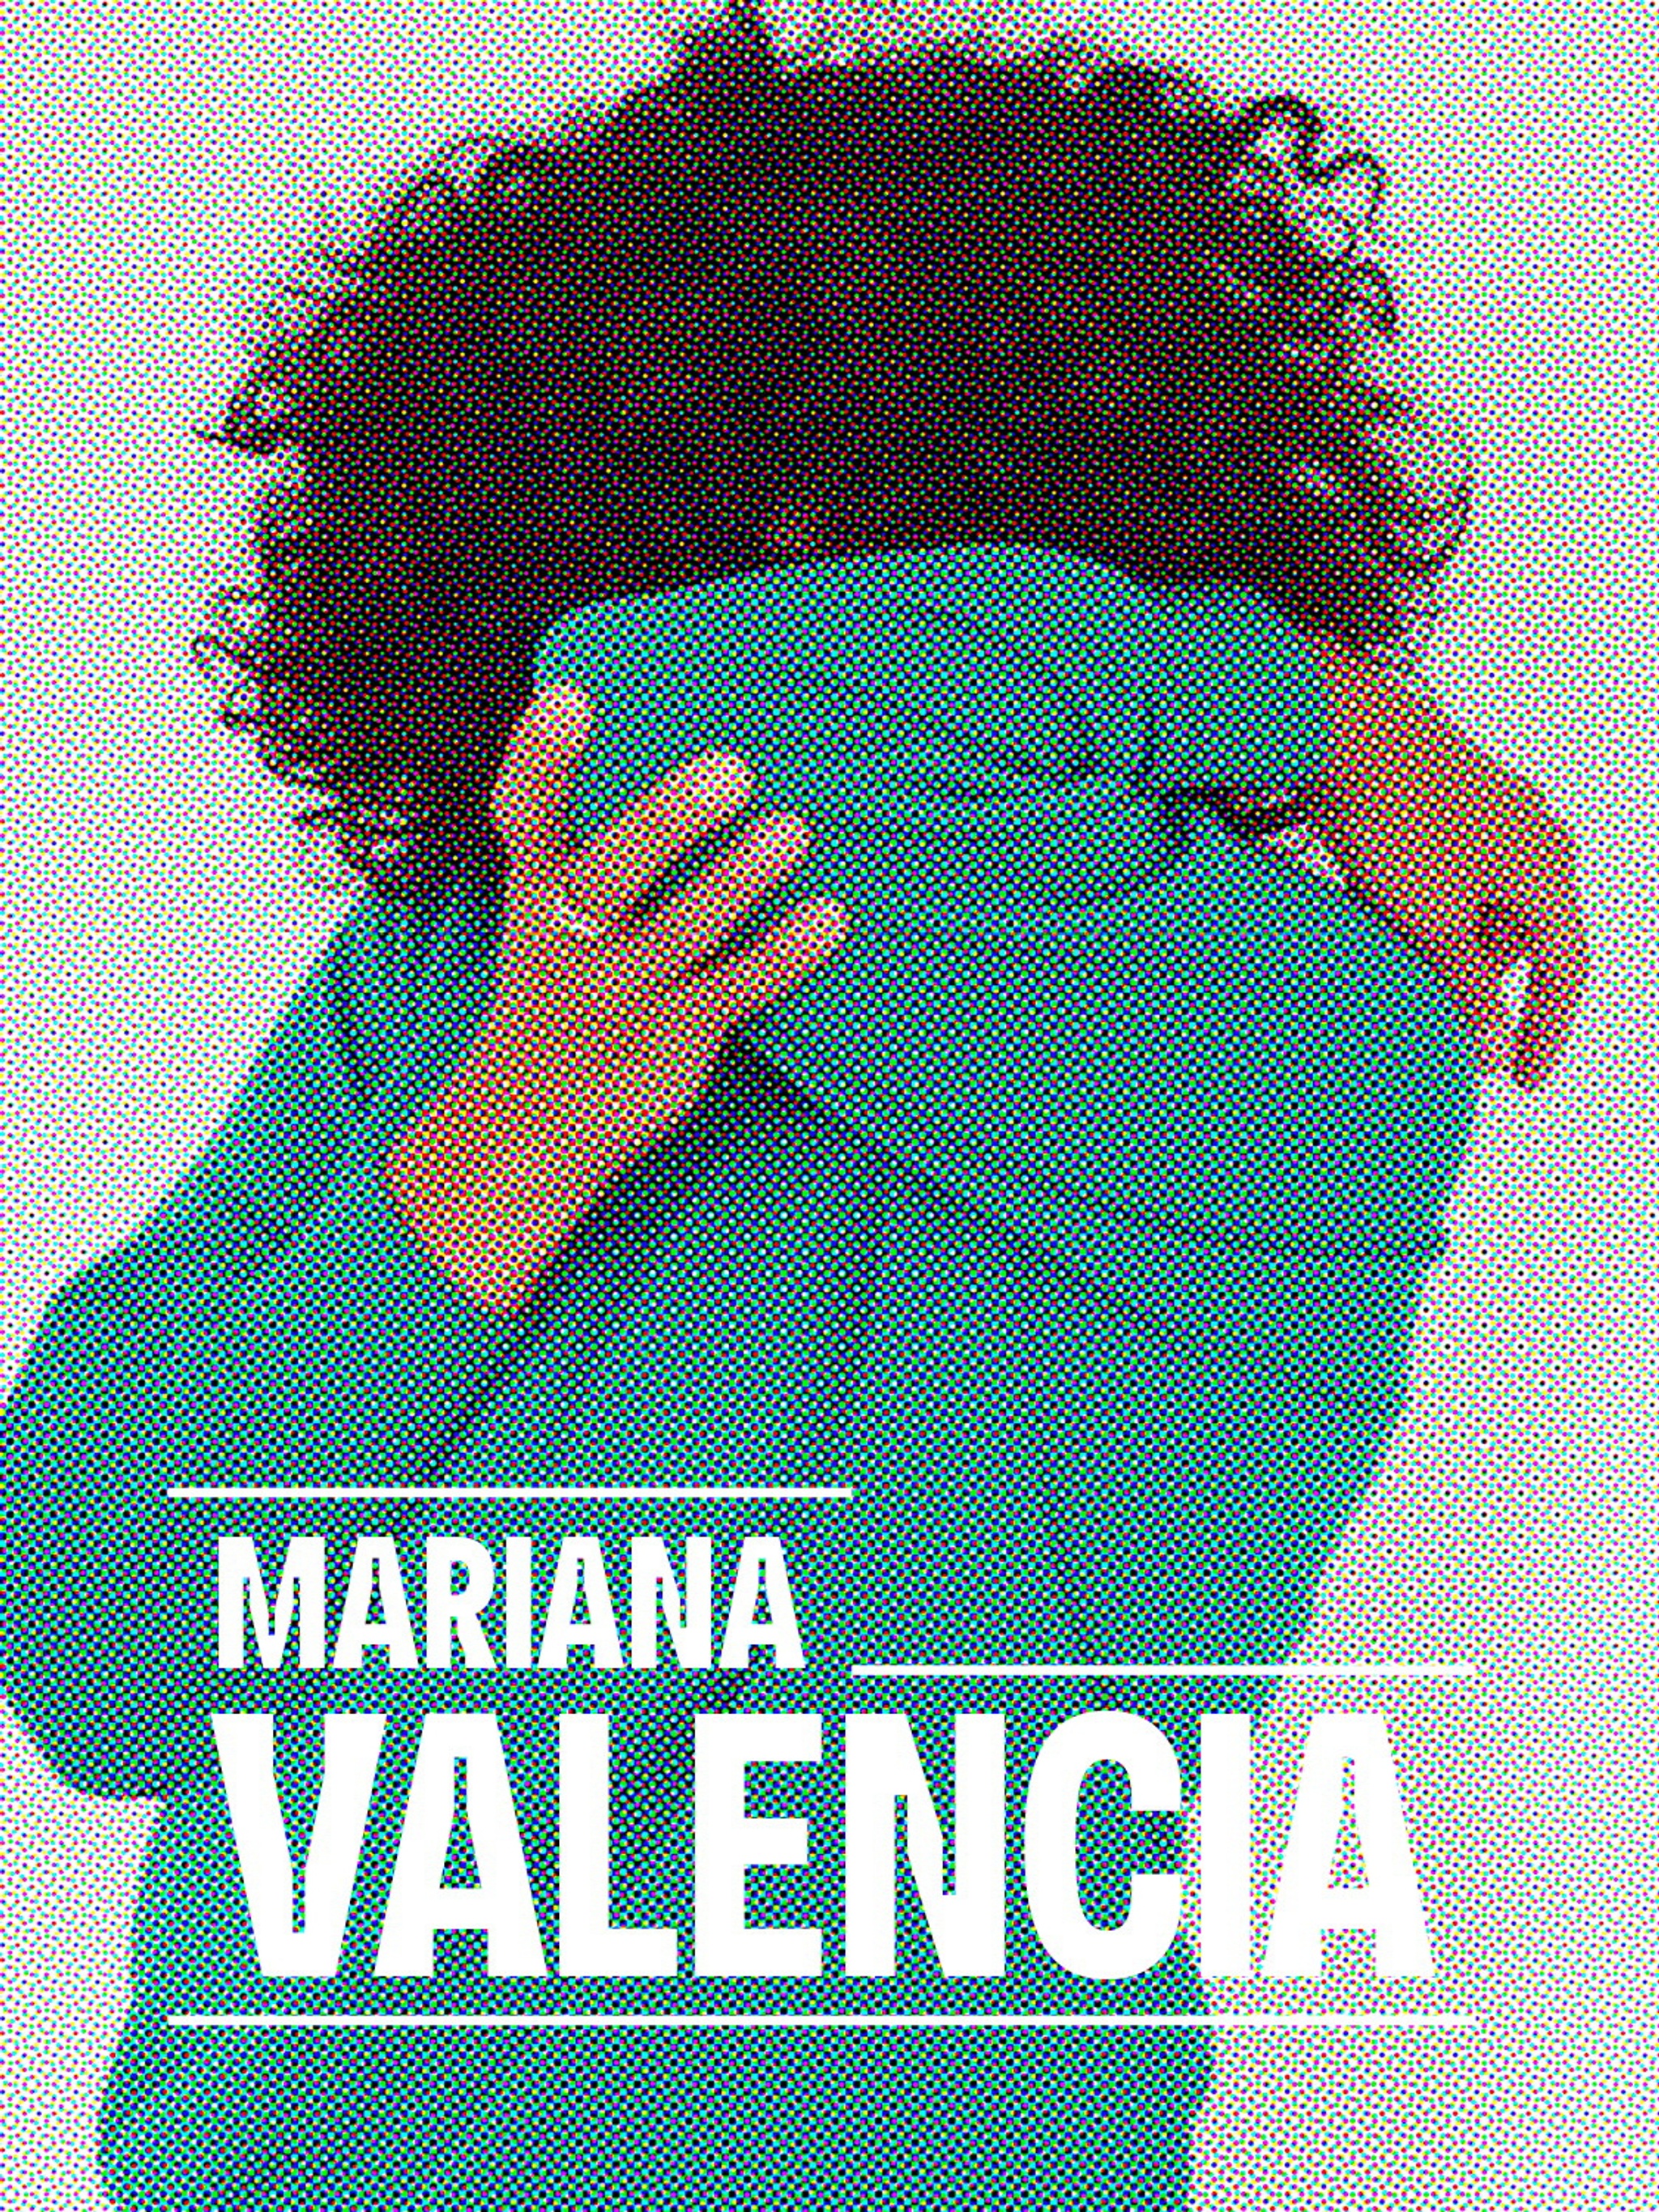 A photo of artist Mariana Valencia in a teal sweatshirt hiding their face behind their arm and elbow with the name Mariana Valencia superimposed in white type